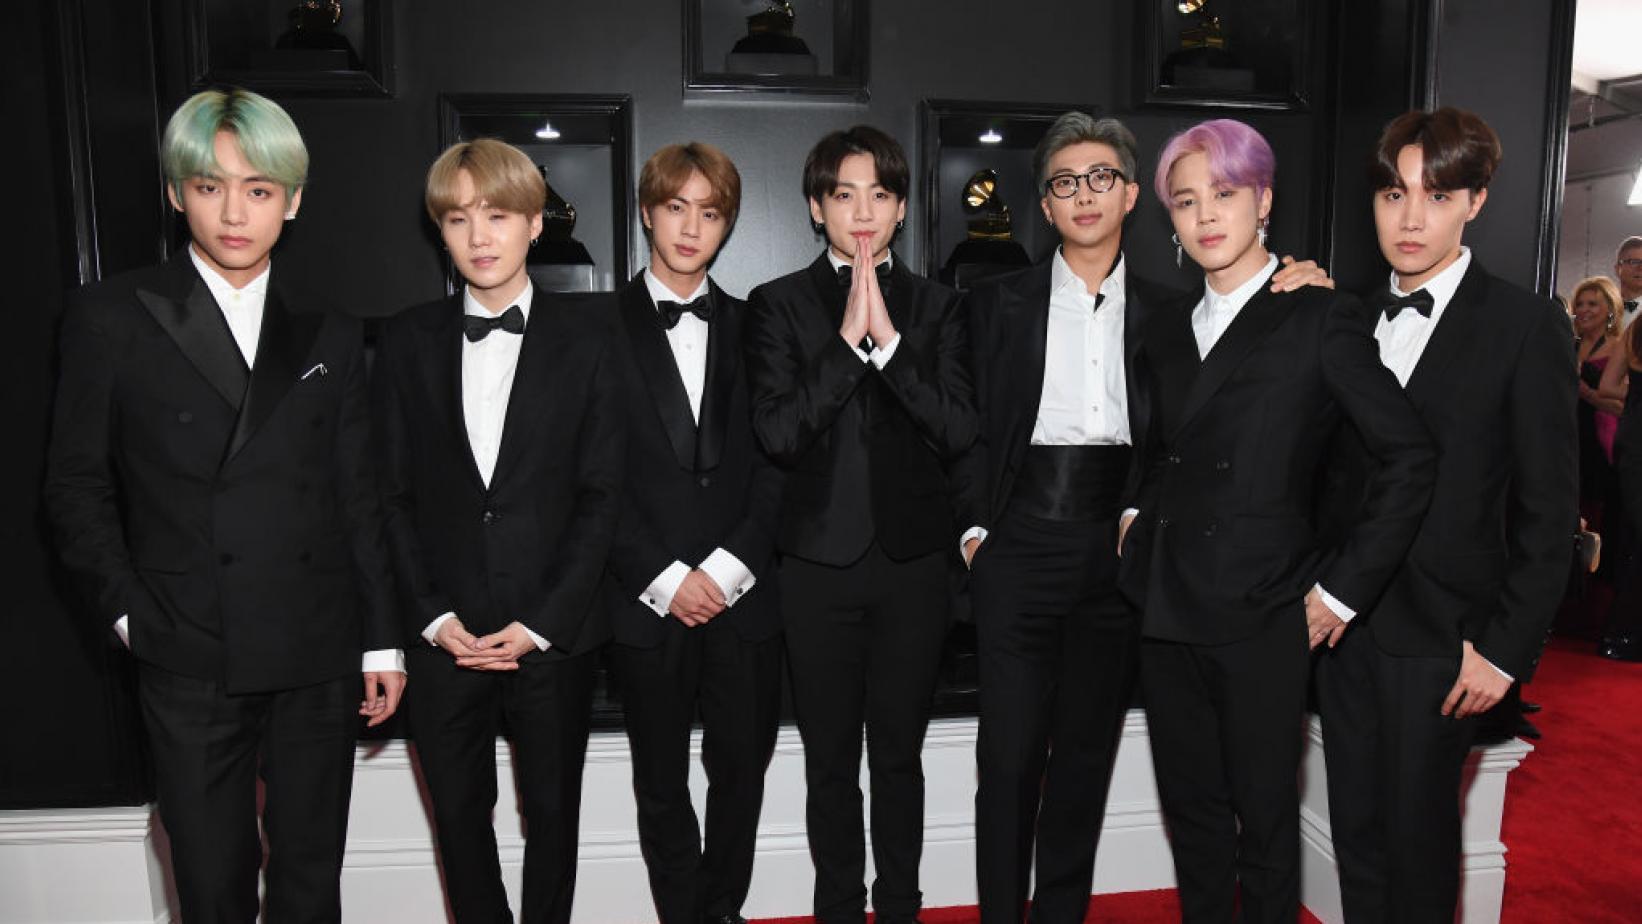 BTS's Success: The Power of Middle-Aged Fans Fueling Their Rise to the Top